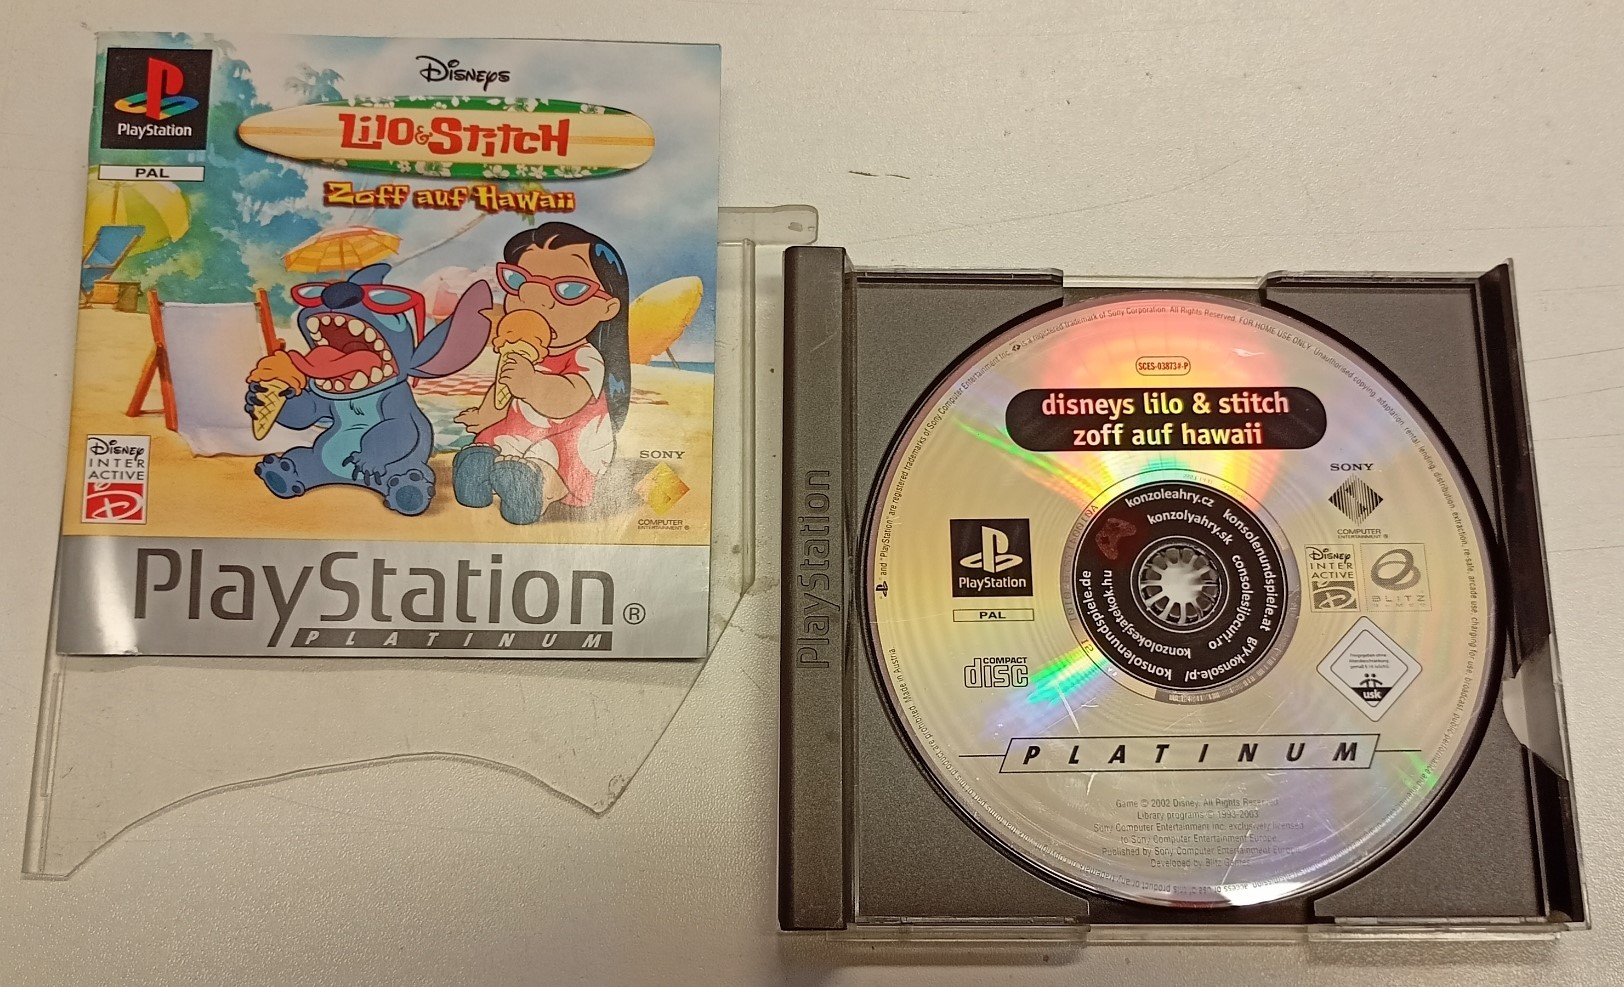 Lilo & Stitch: Trouble in Paradise Complete Gameplay (PlayStation,PS1,PSX)  